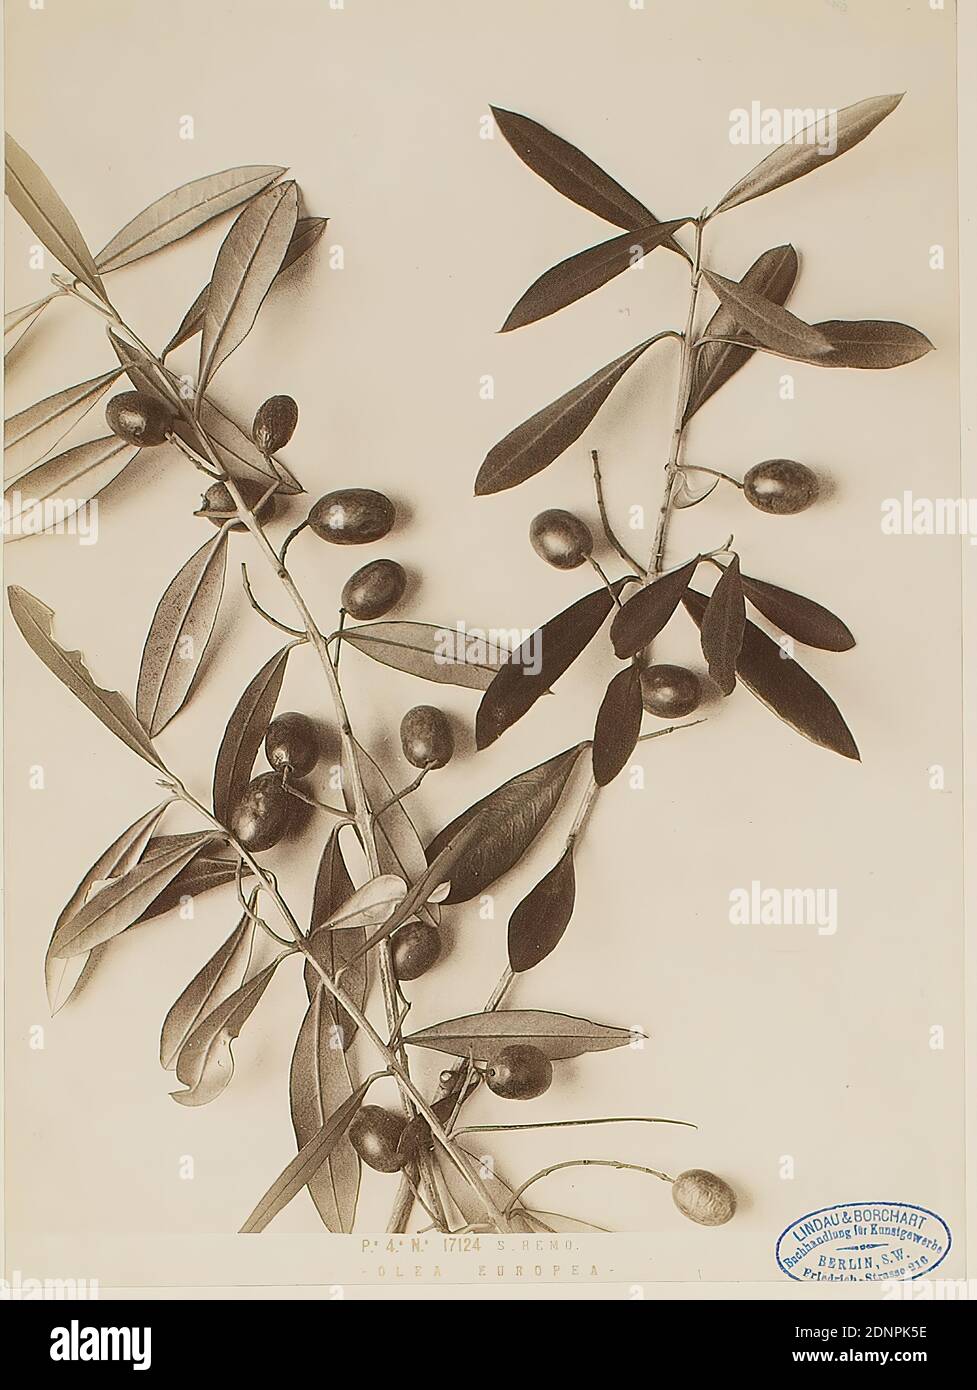 Remo - Olea Europea, albumin paper, black and white positive process, image size: height: 26.00 cm; width: 19.20 cm, REMO - OLEA EUROPEA -. Recto and right on the picture Stempel Lindau & Borchart - Buchhandlung für Kunstgewerbe, Berlin S.W, Friedrich-Strasse 216, photography, trees, bushes Stock Photo